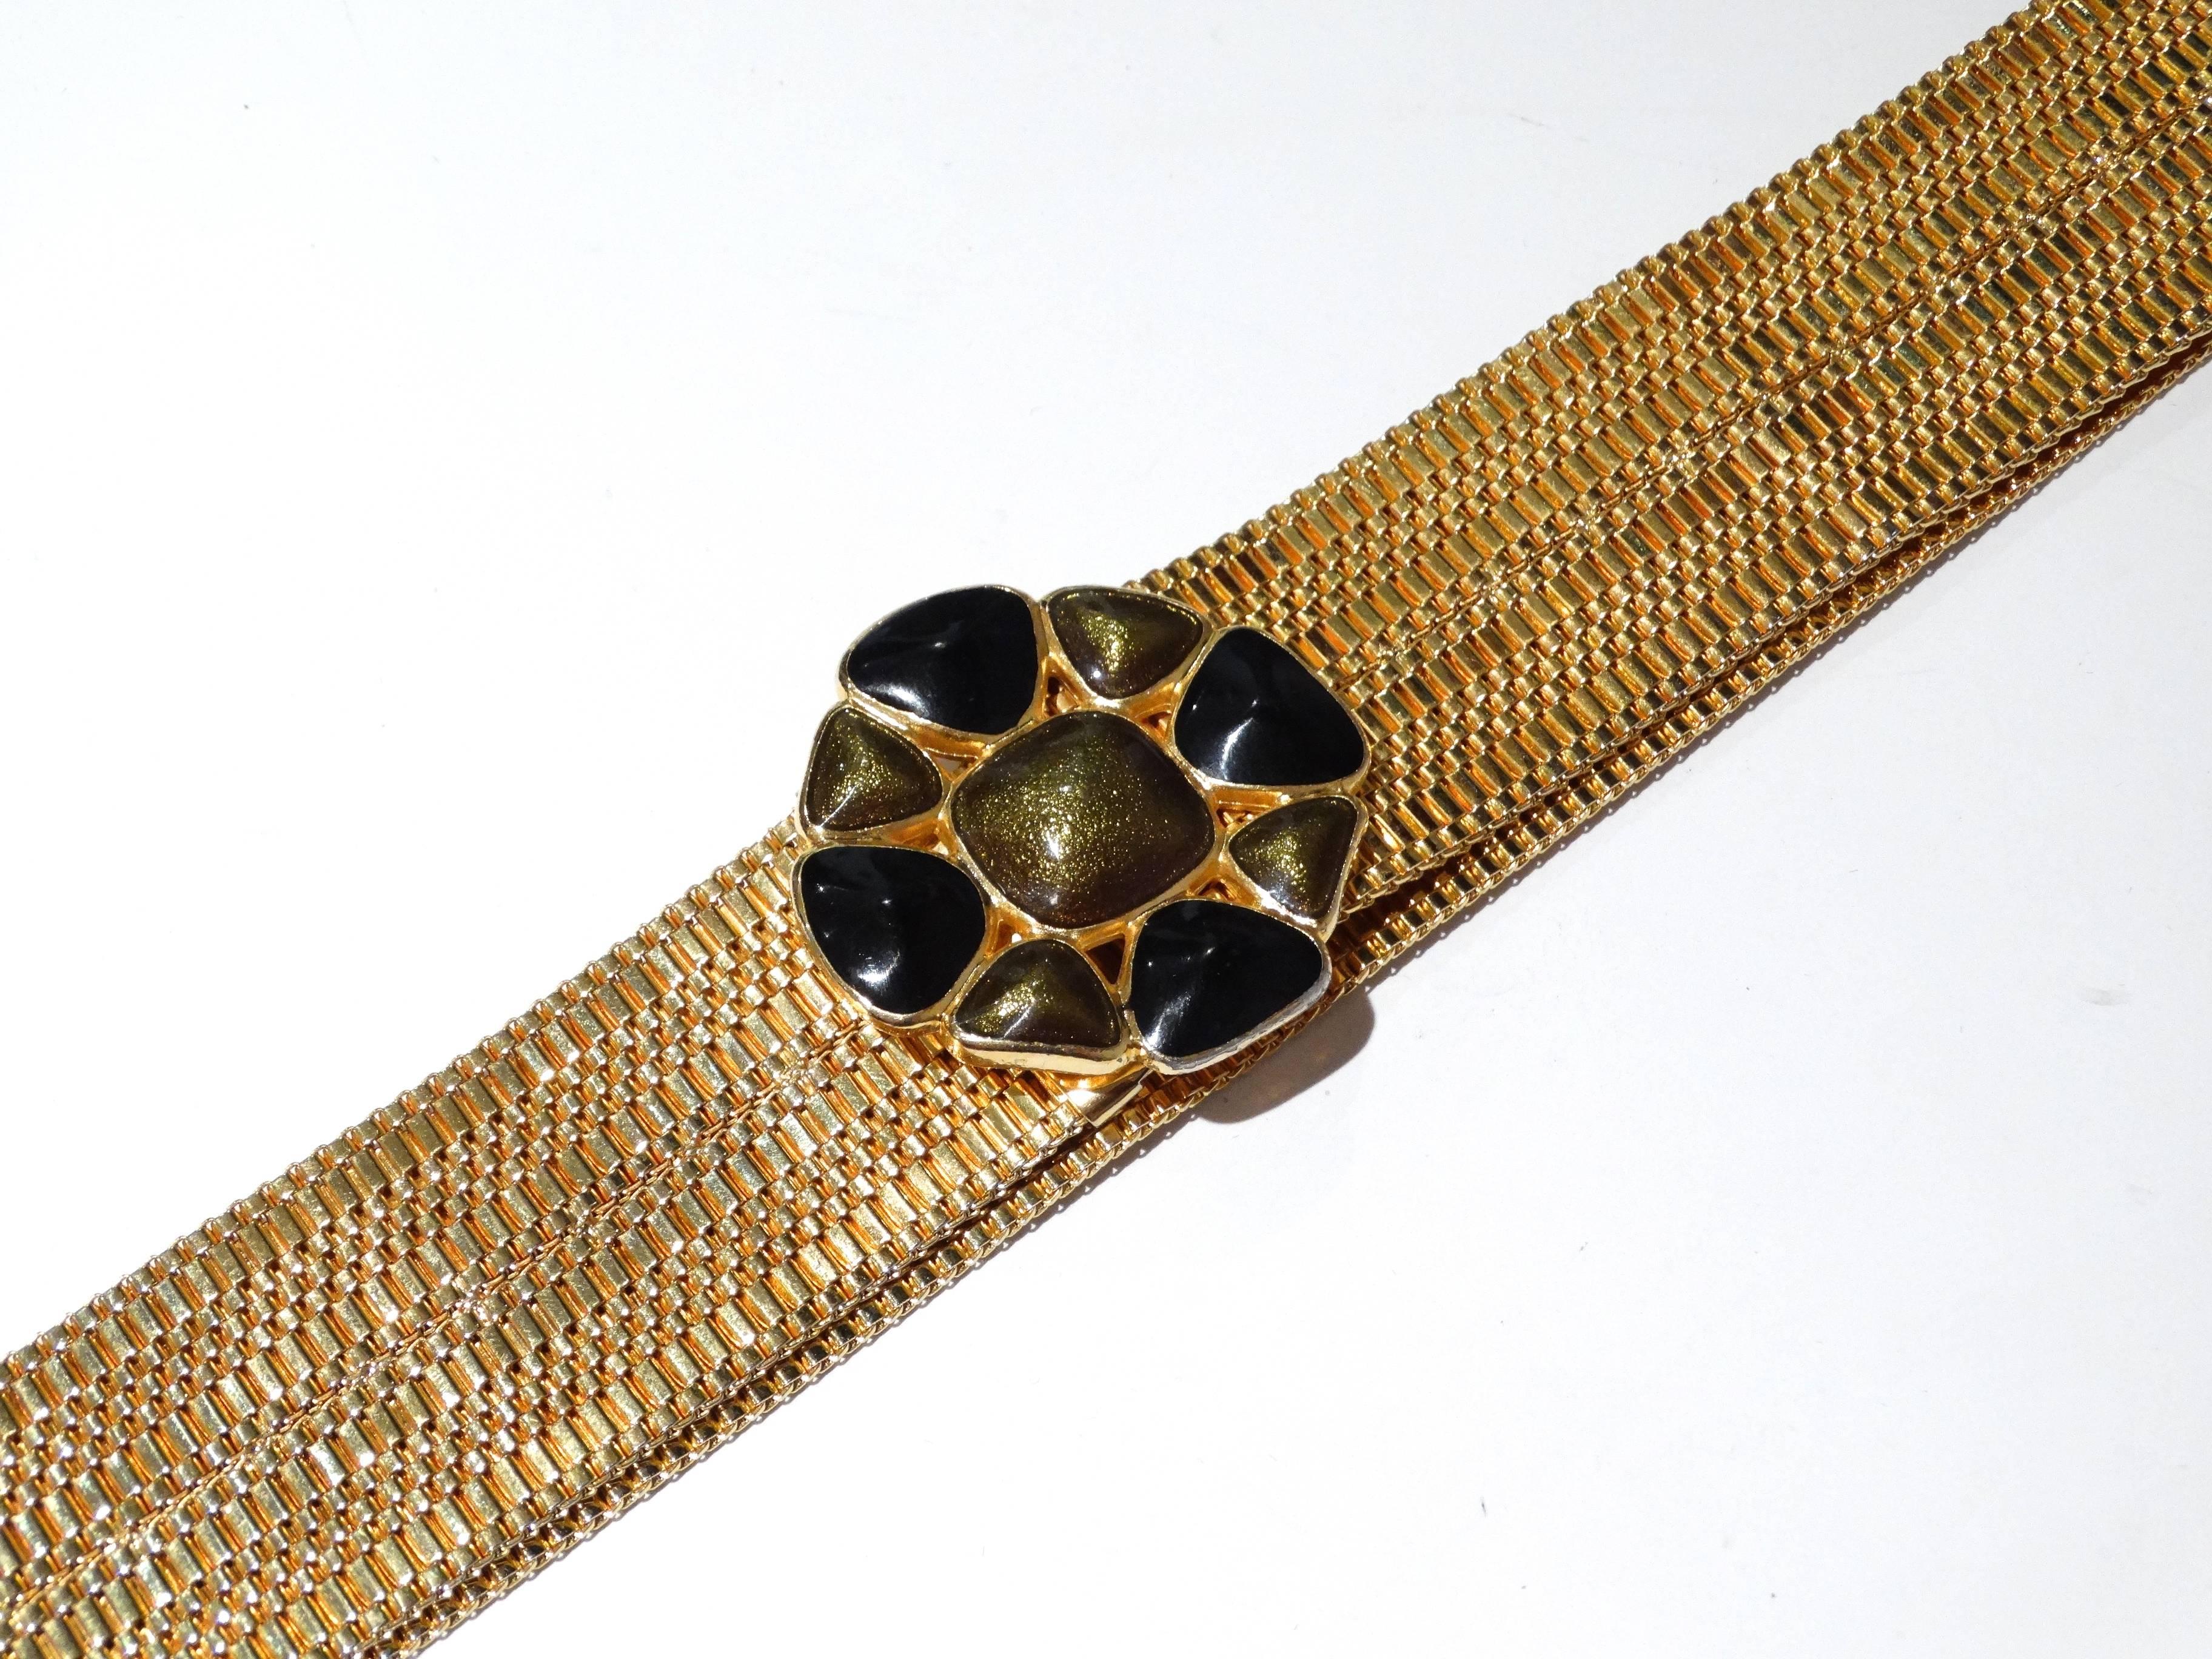 1980's Accessory Accents NYC gold mesh belt with the center pendent buckle, constructed with a pendant-like arrangement of enamel (black and olive green in color). This belt is finished with a hook closure. Pristine, gold tone shiny finish without